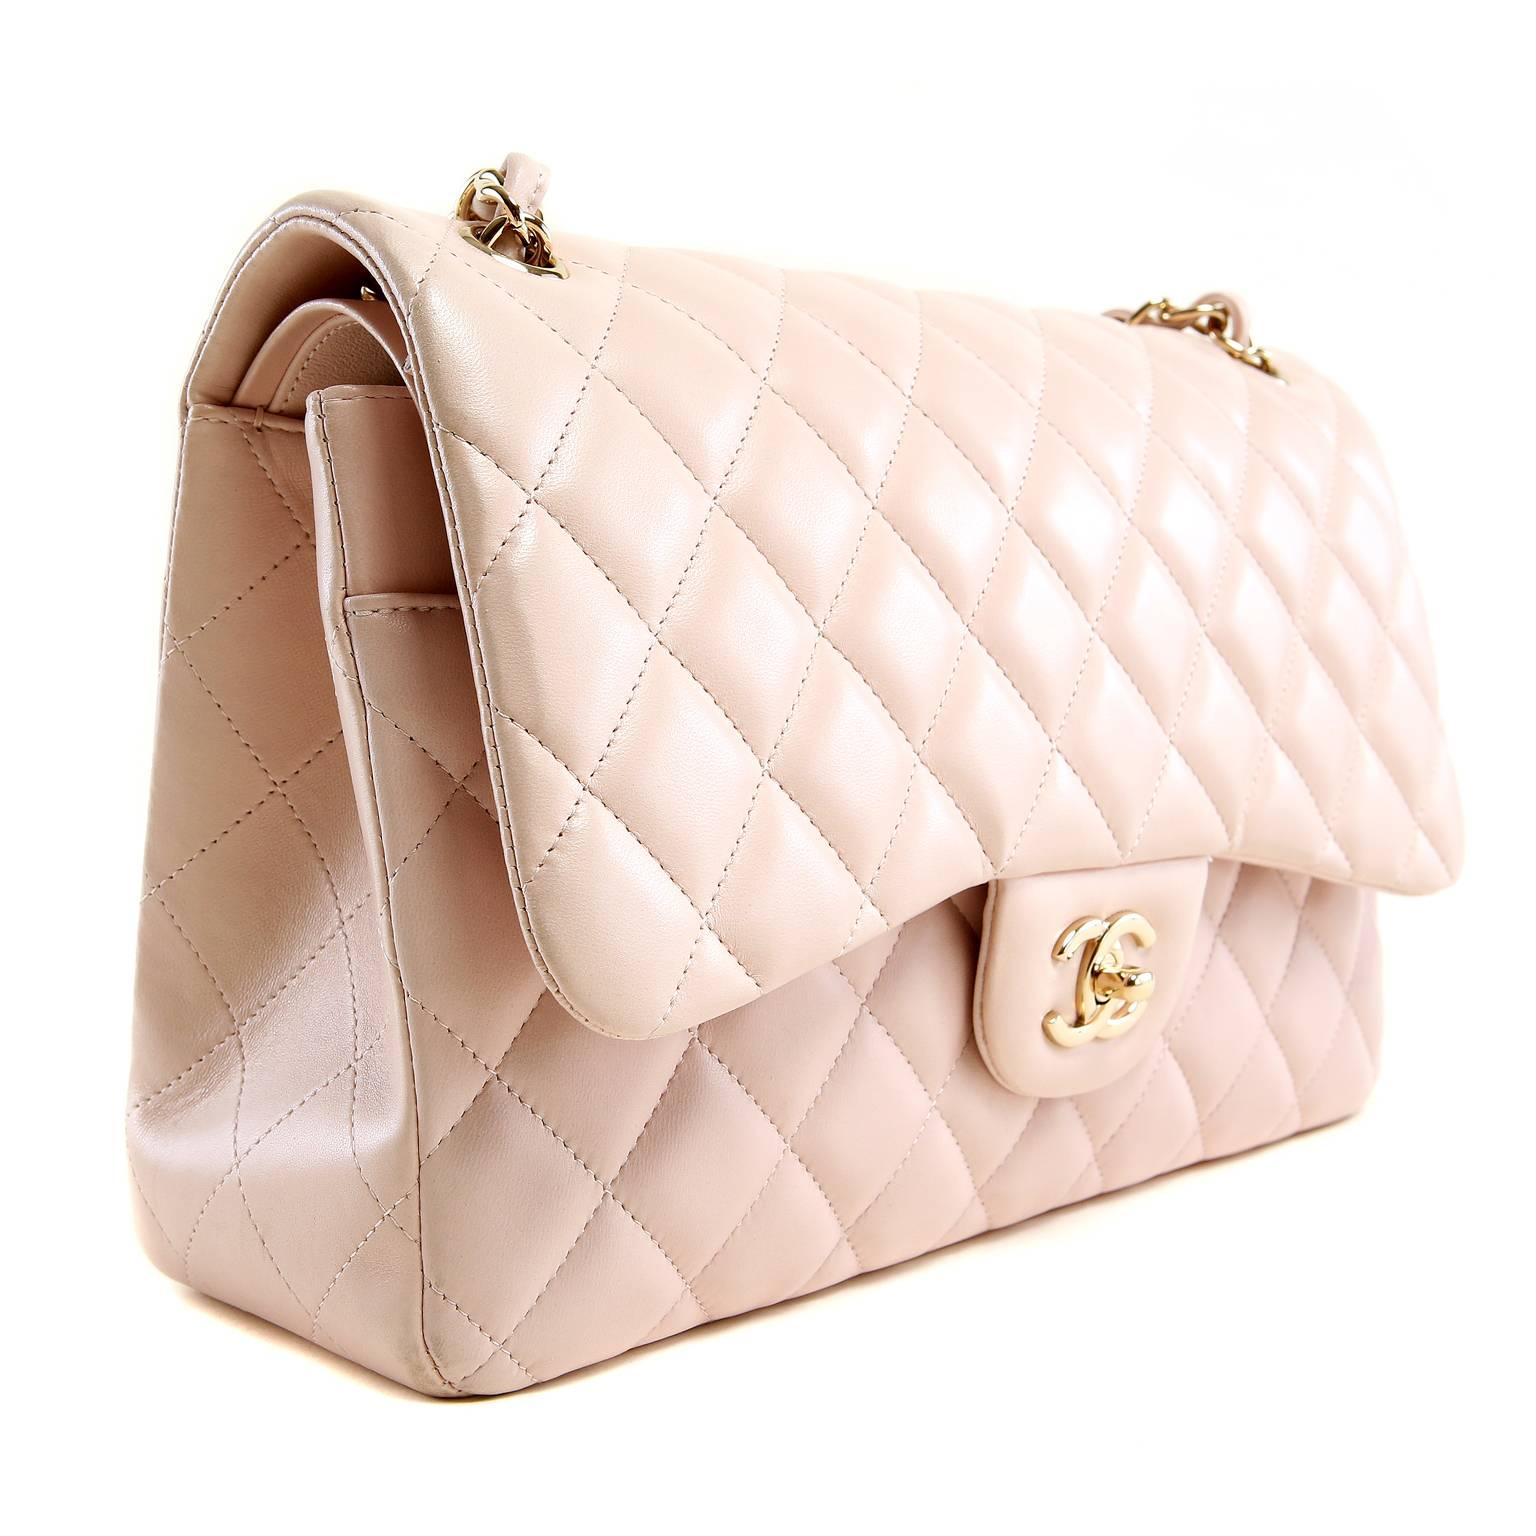 Chanel Pale Pink Lambskin Jumbo Classic- PRISTINE; appears never carried.  The delicate color is soft and feminine; a beautiful addition to any collection.
 
Ballerina pink lambskin is quilted in signature Chanel diamond stitched pattern.  Gold